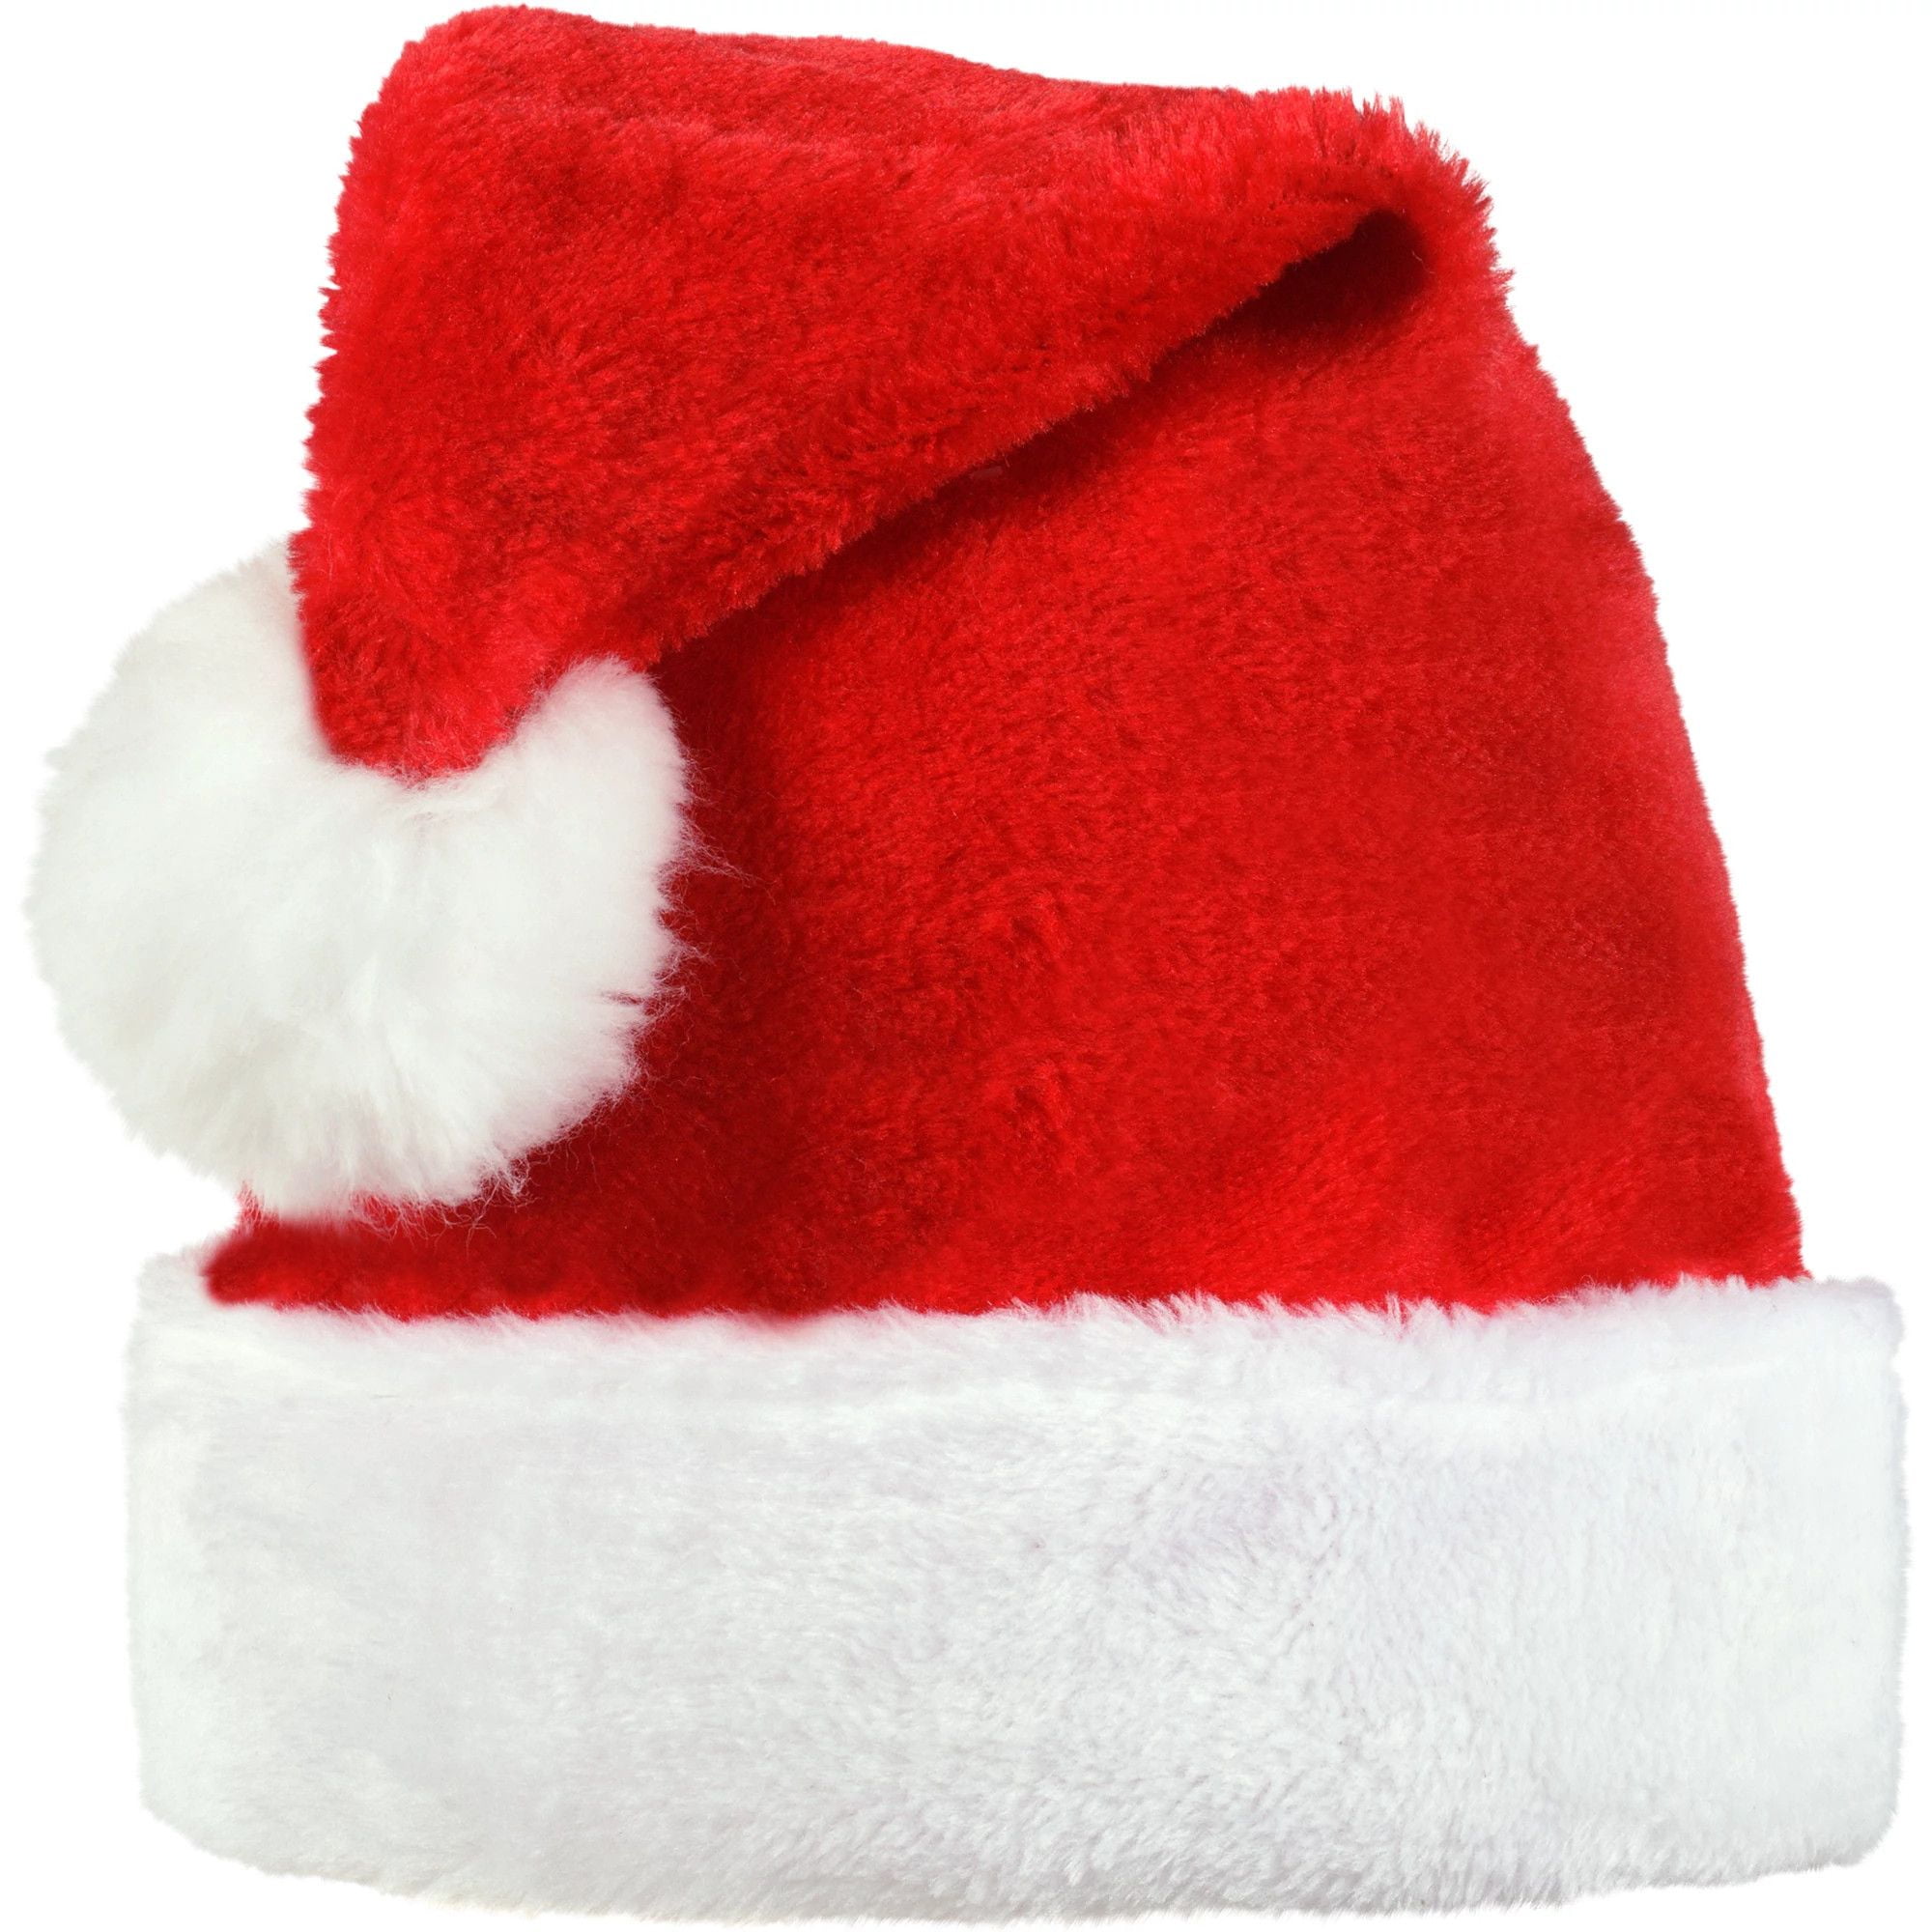 Details about   santa hat classic red and white size sm med lrg 